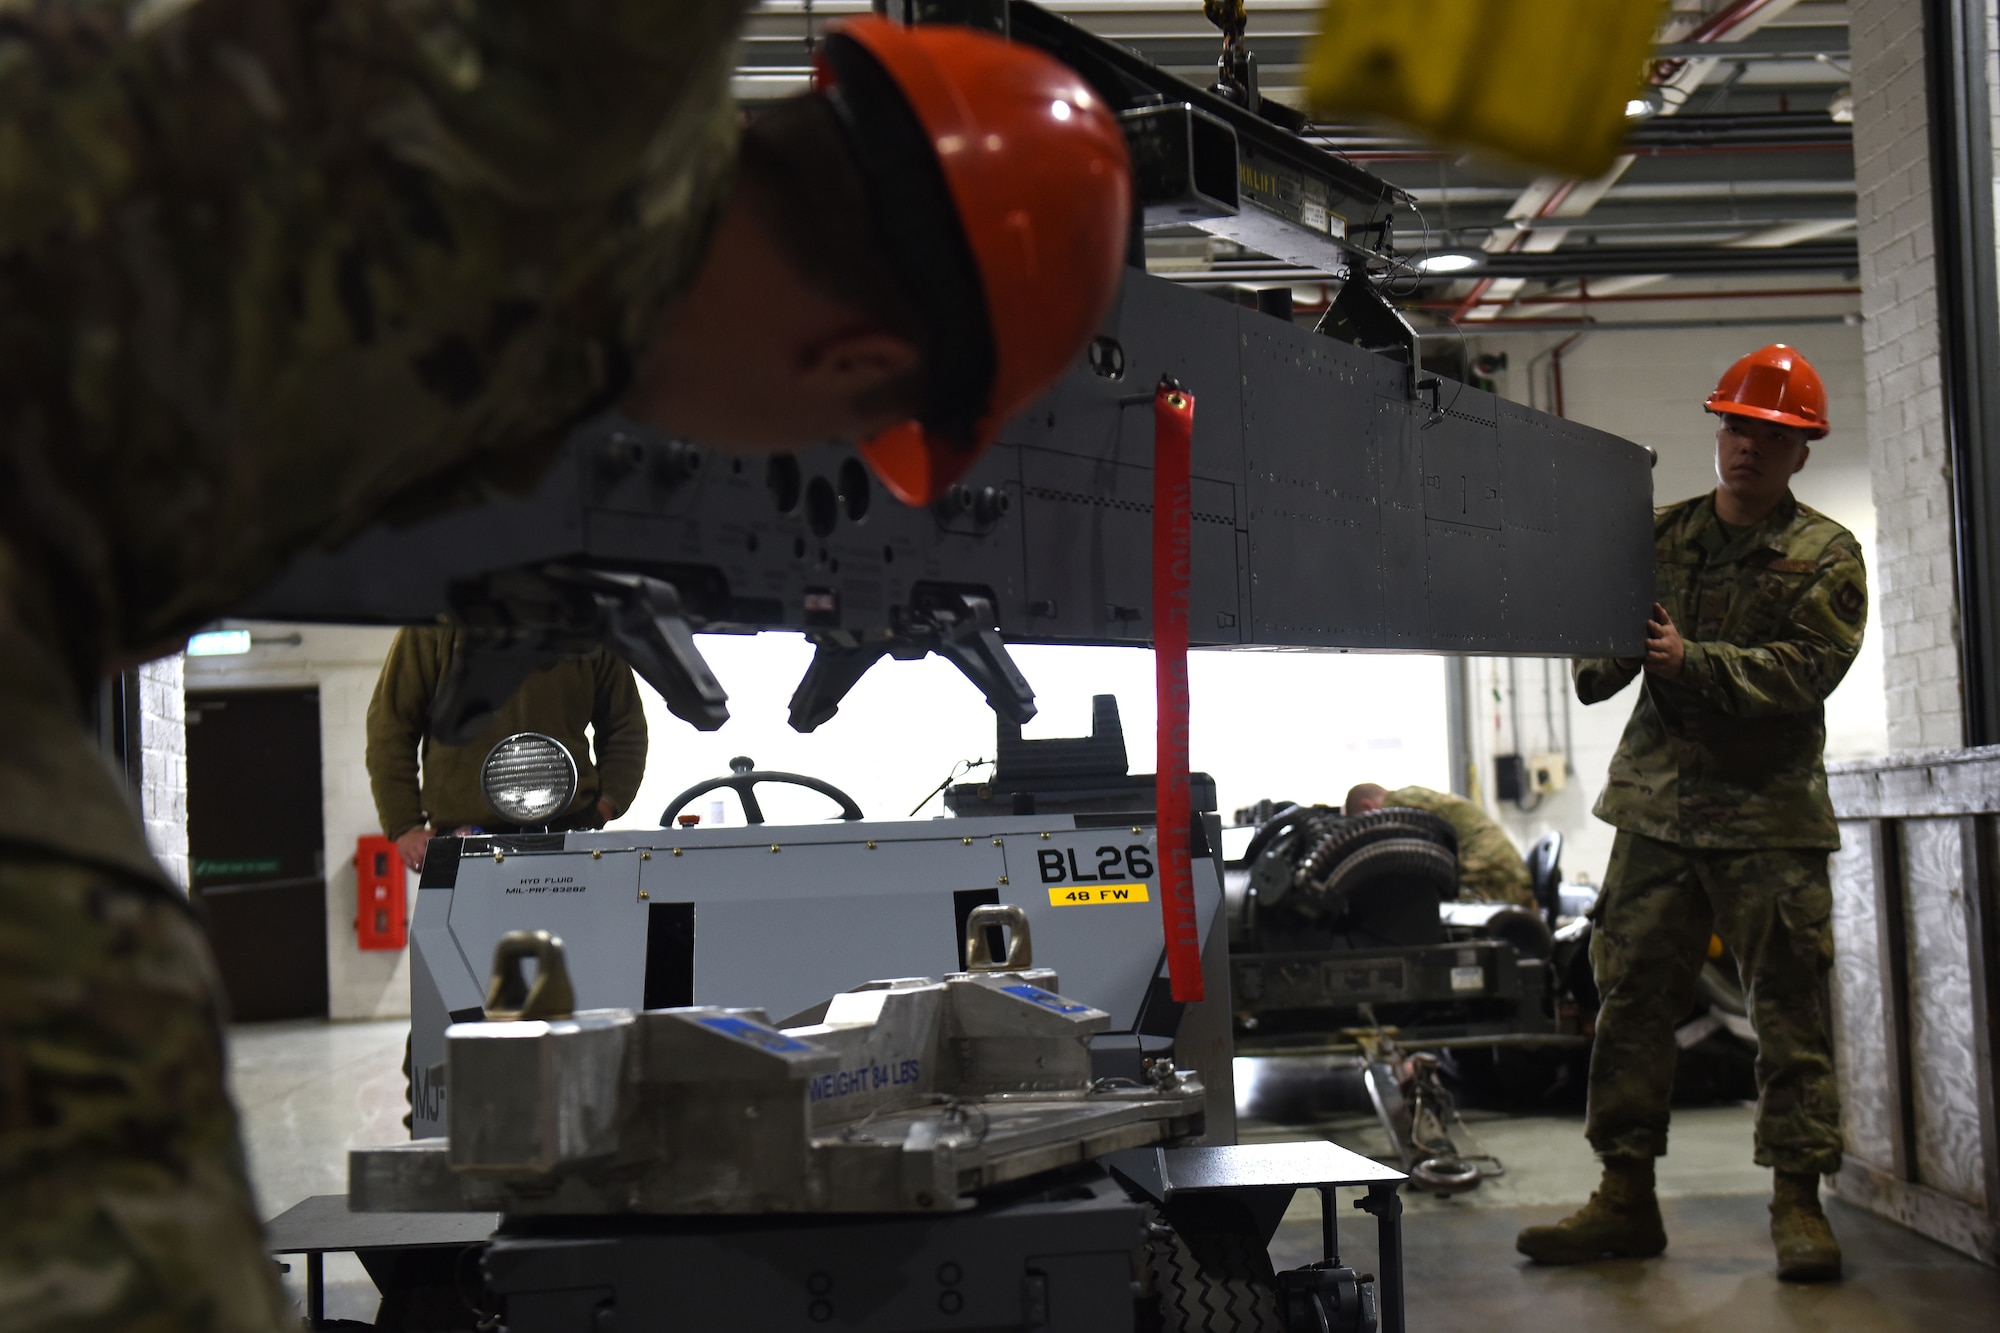 Armament maintenance technicians from the 48th Munitions Squadron use a crane to pick up a centerline pylon at Royal Air Force Lakenheath, England, Sept. 11, 2019. Armament flight Airmen are trained in complete disassemble, inspection, lubrication, reassembly, and functional checks for all weapons-related equipment from both the 48th Fighter Wing F-15C Eagle and F-15E Strike Eagles. (U.S. Air Force photo by Airman 1st Class Madeline Herzog)